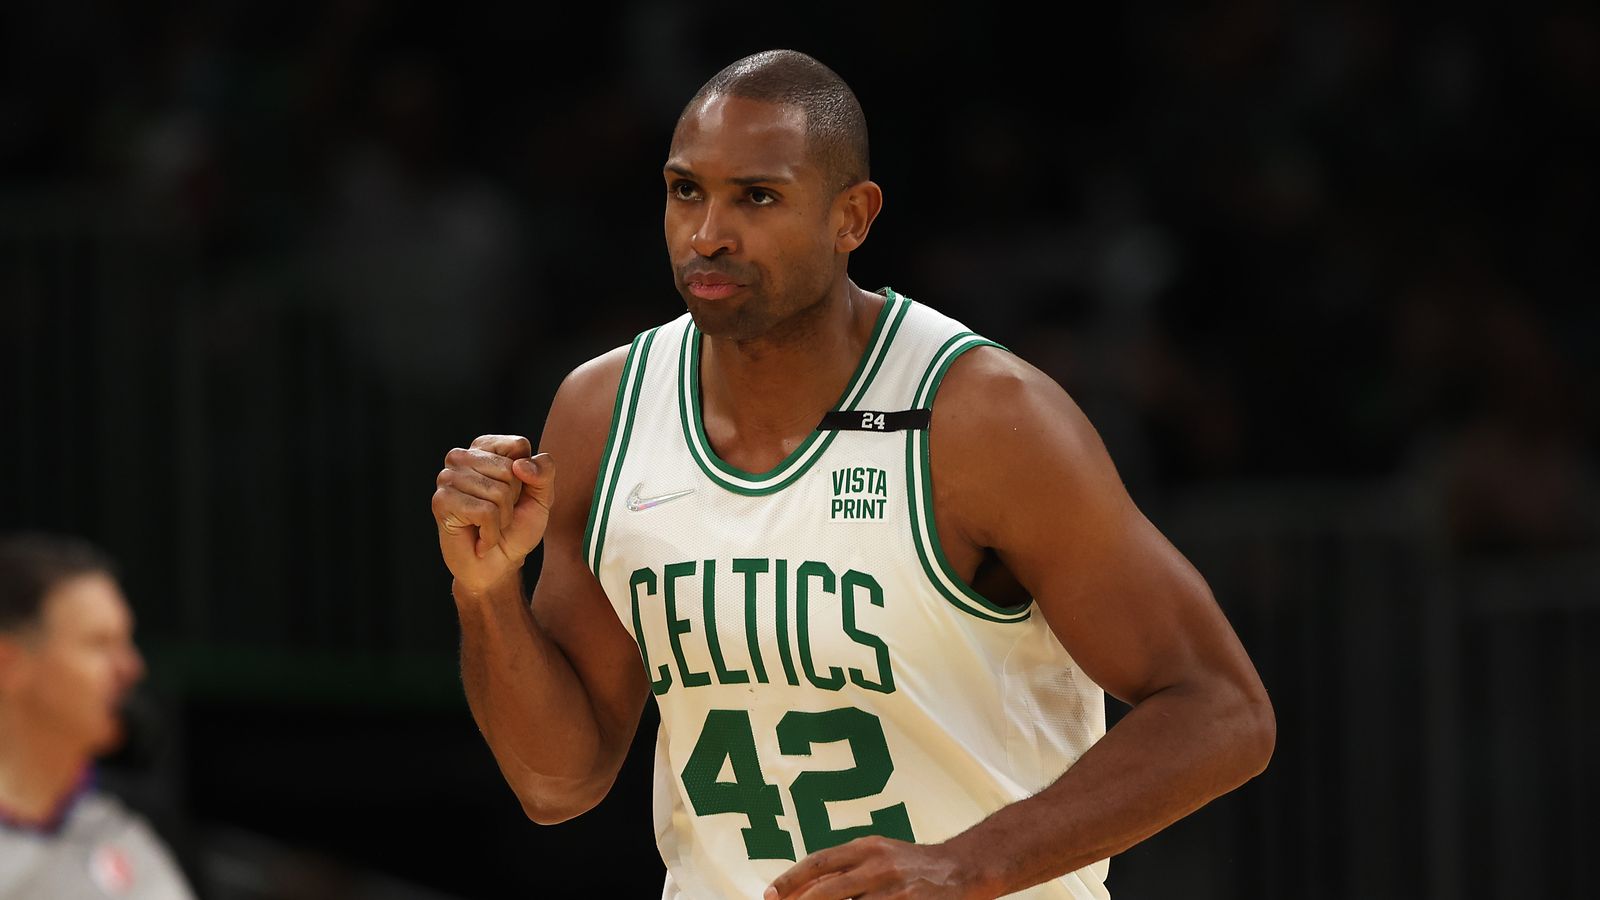 Al Horford: Turning down Rockets was 'very difficult decision